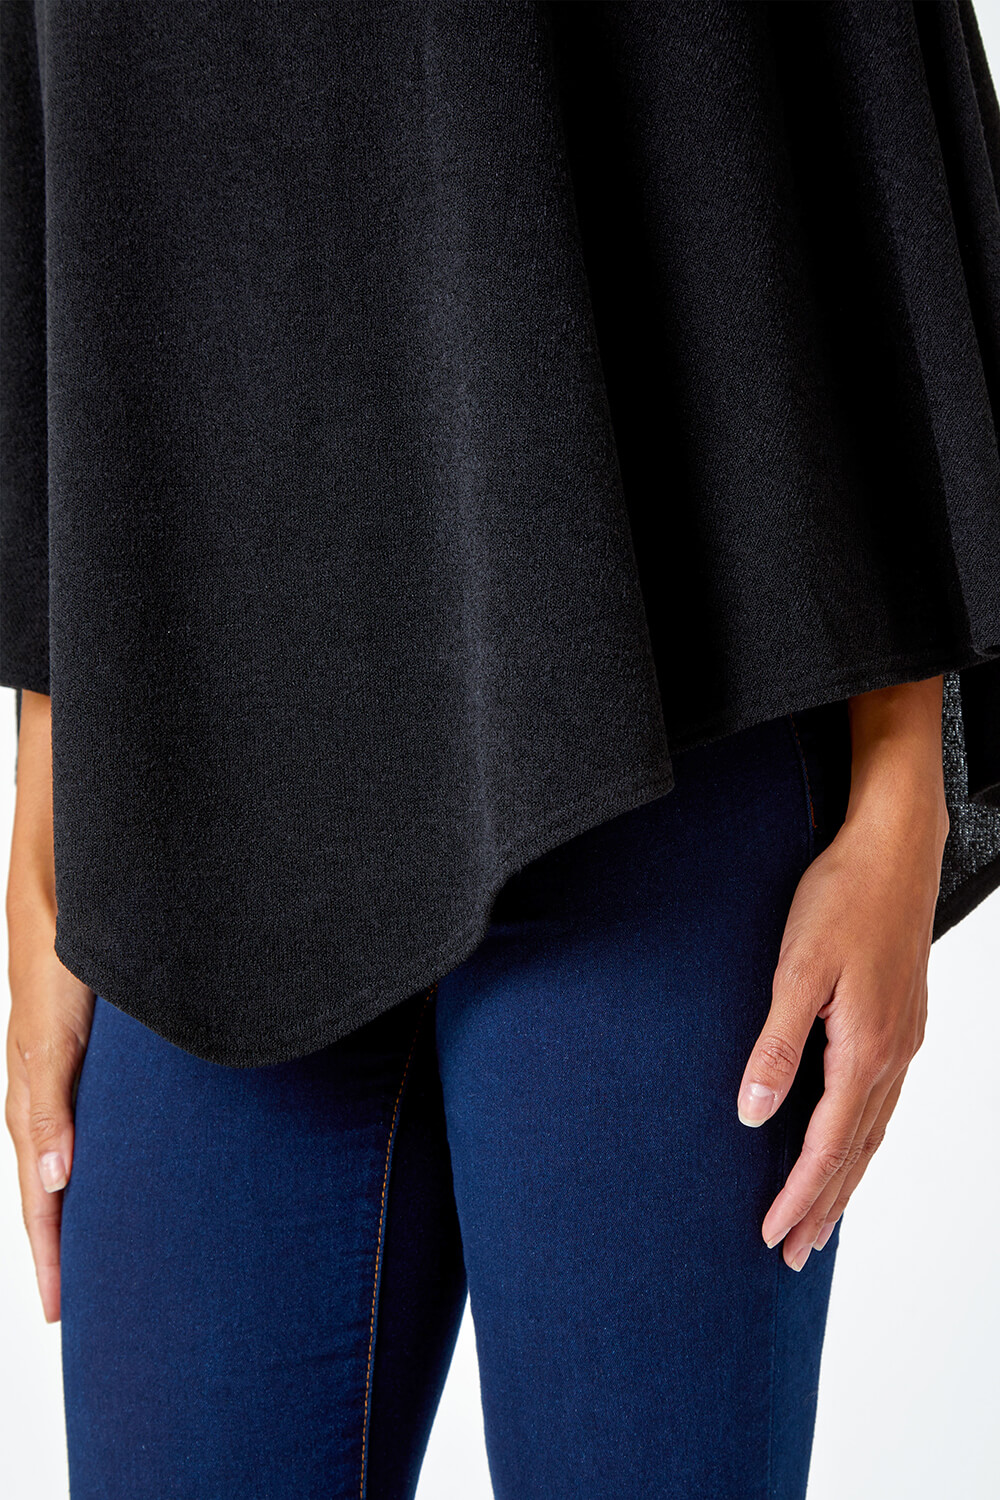 Black Marl Overlay Stretch Top, Image 5 of 5